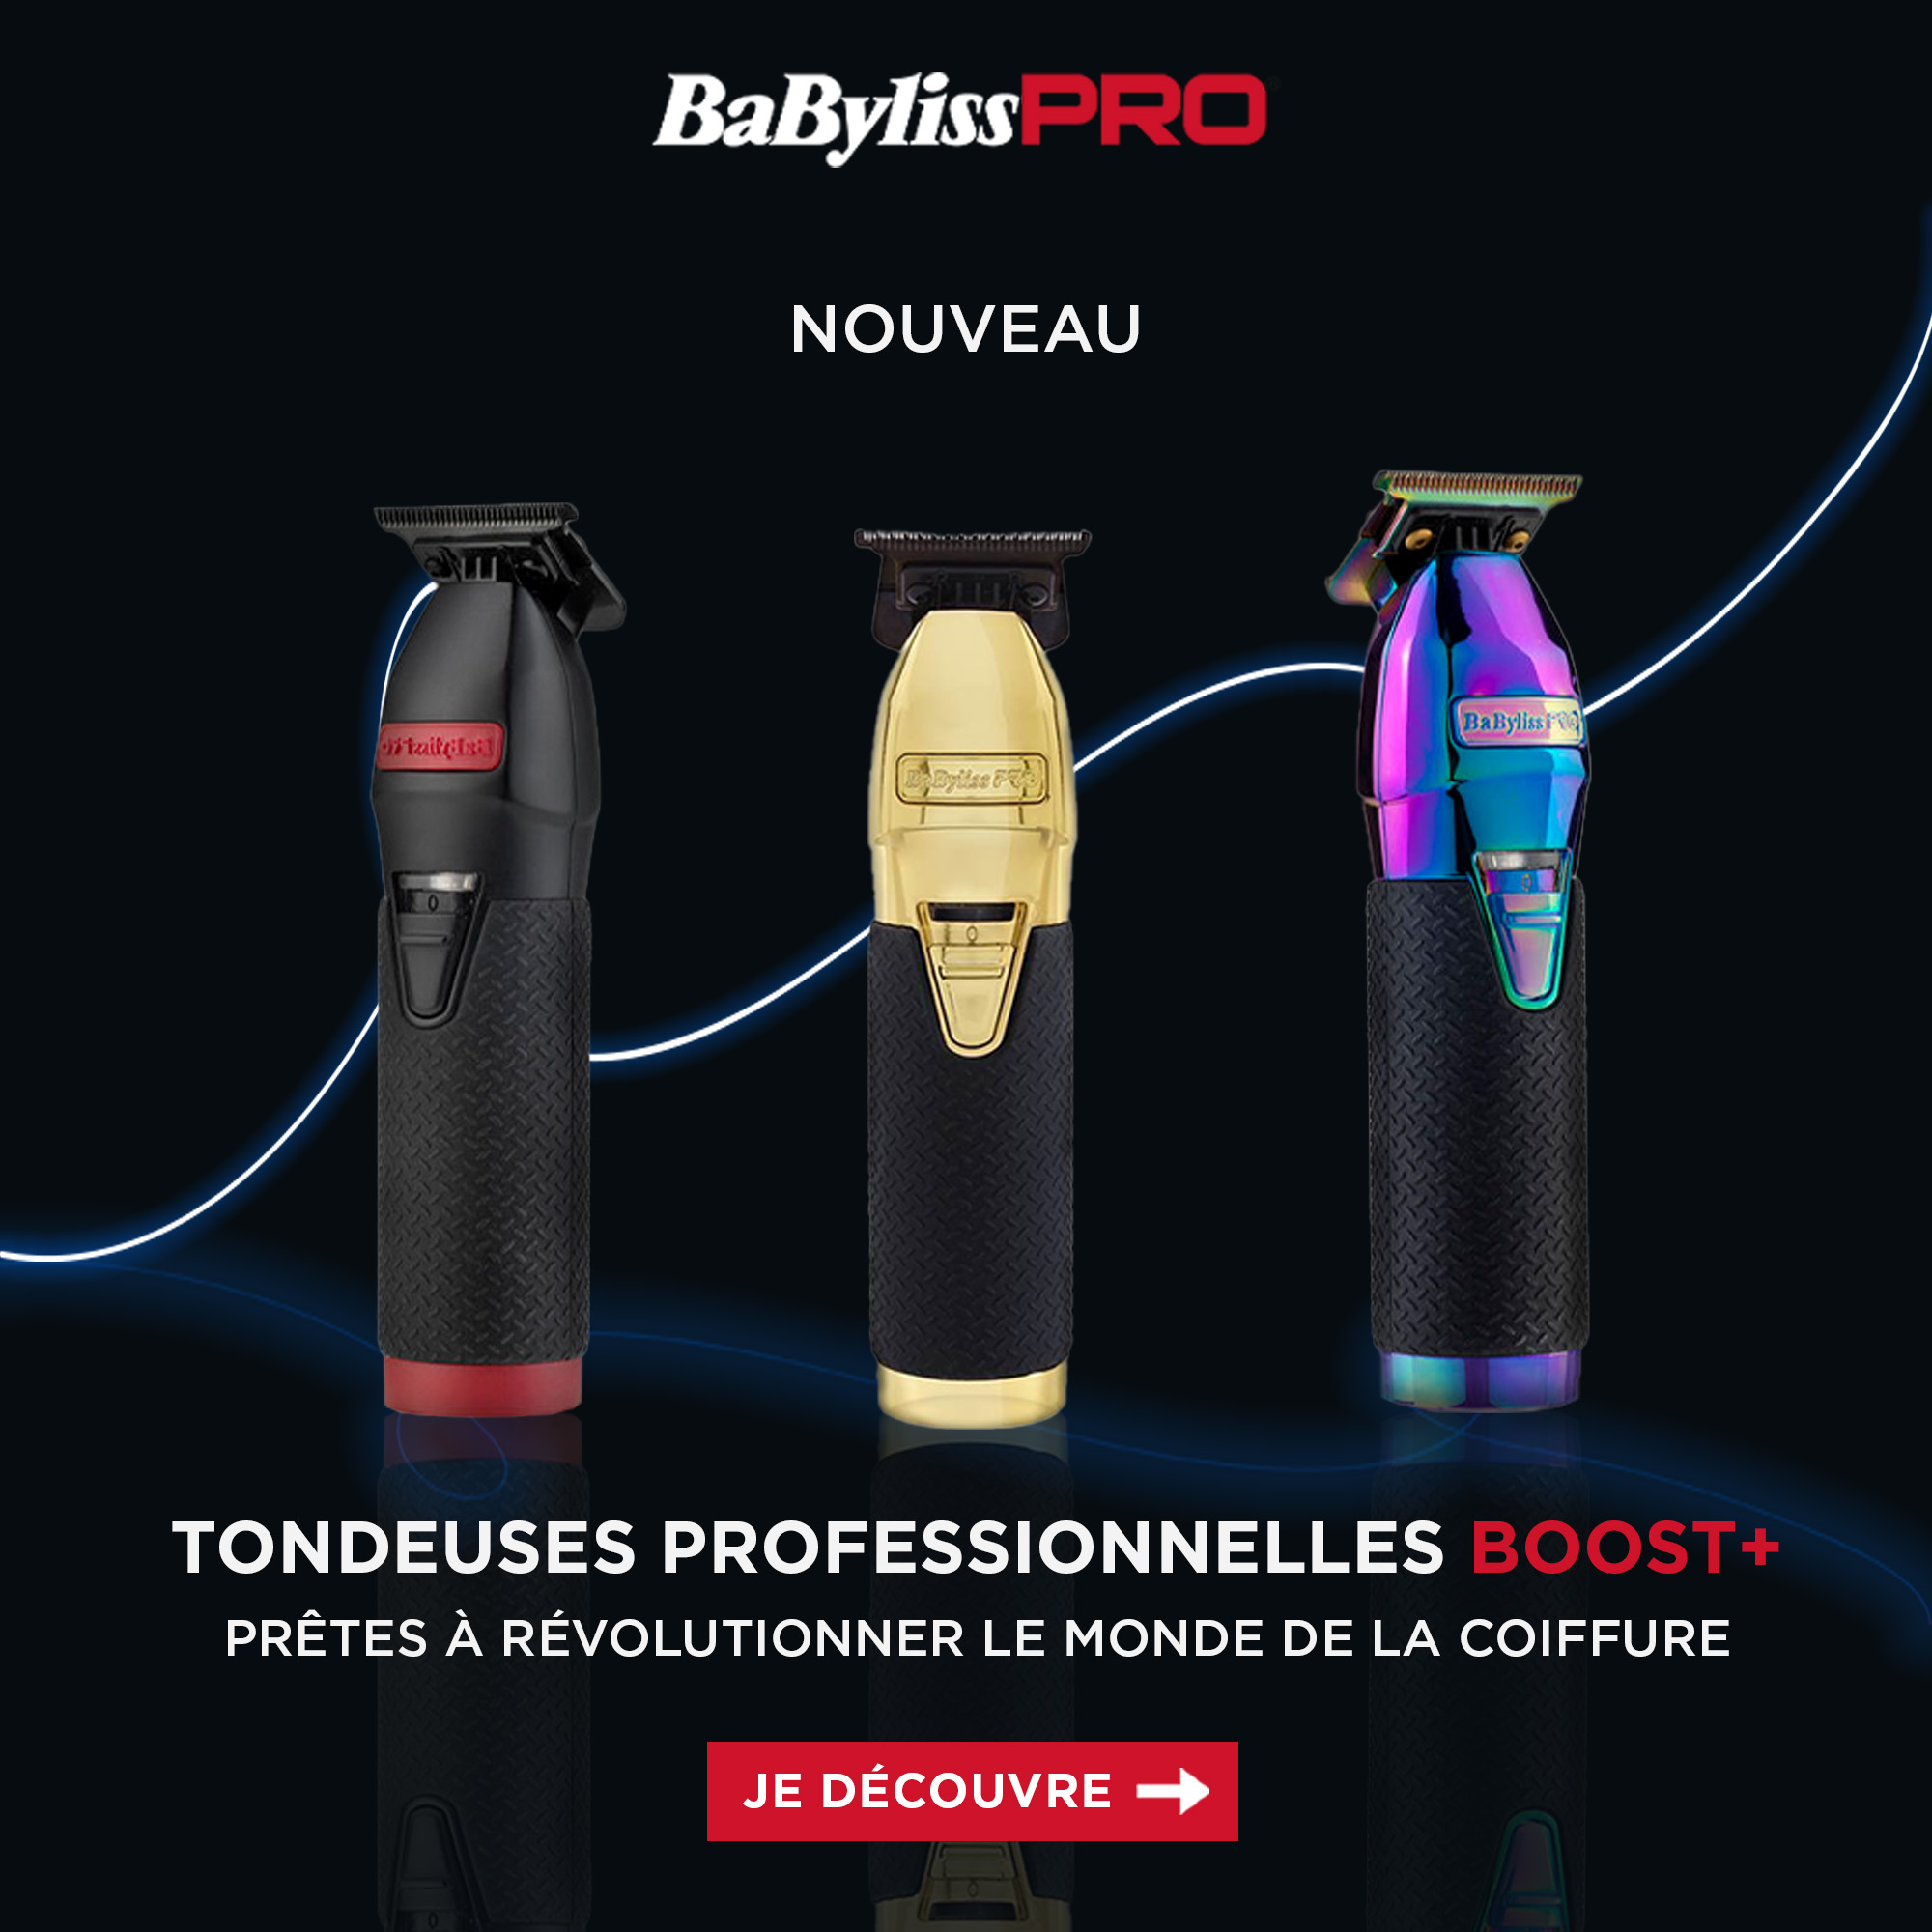 https://www.procoiffure.com/catalogsearch/boost%20babyliss&familly=&order=pert